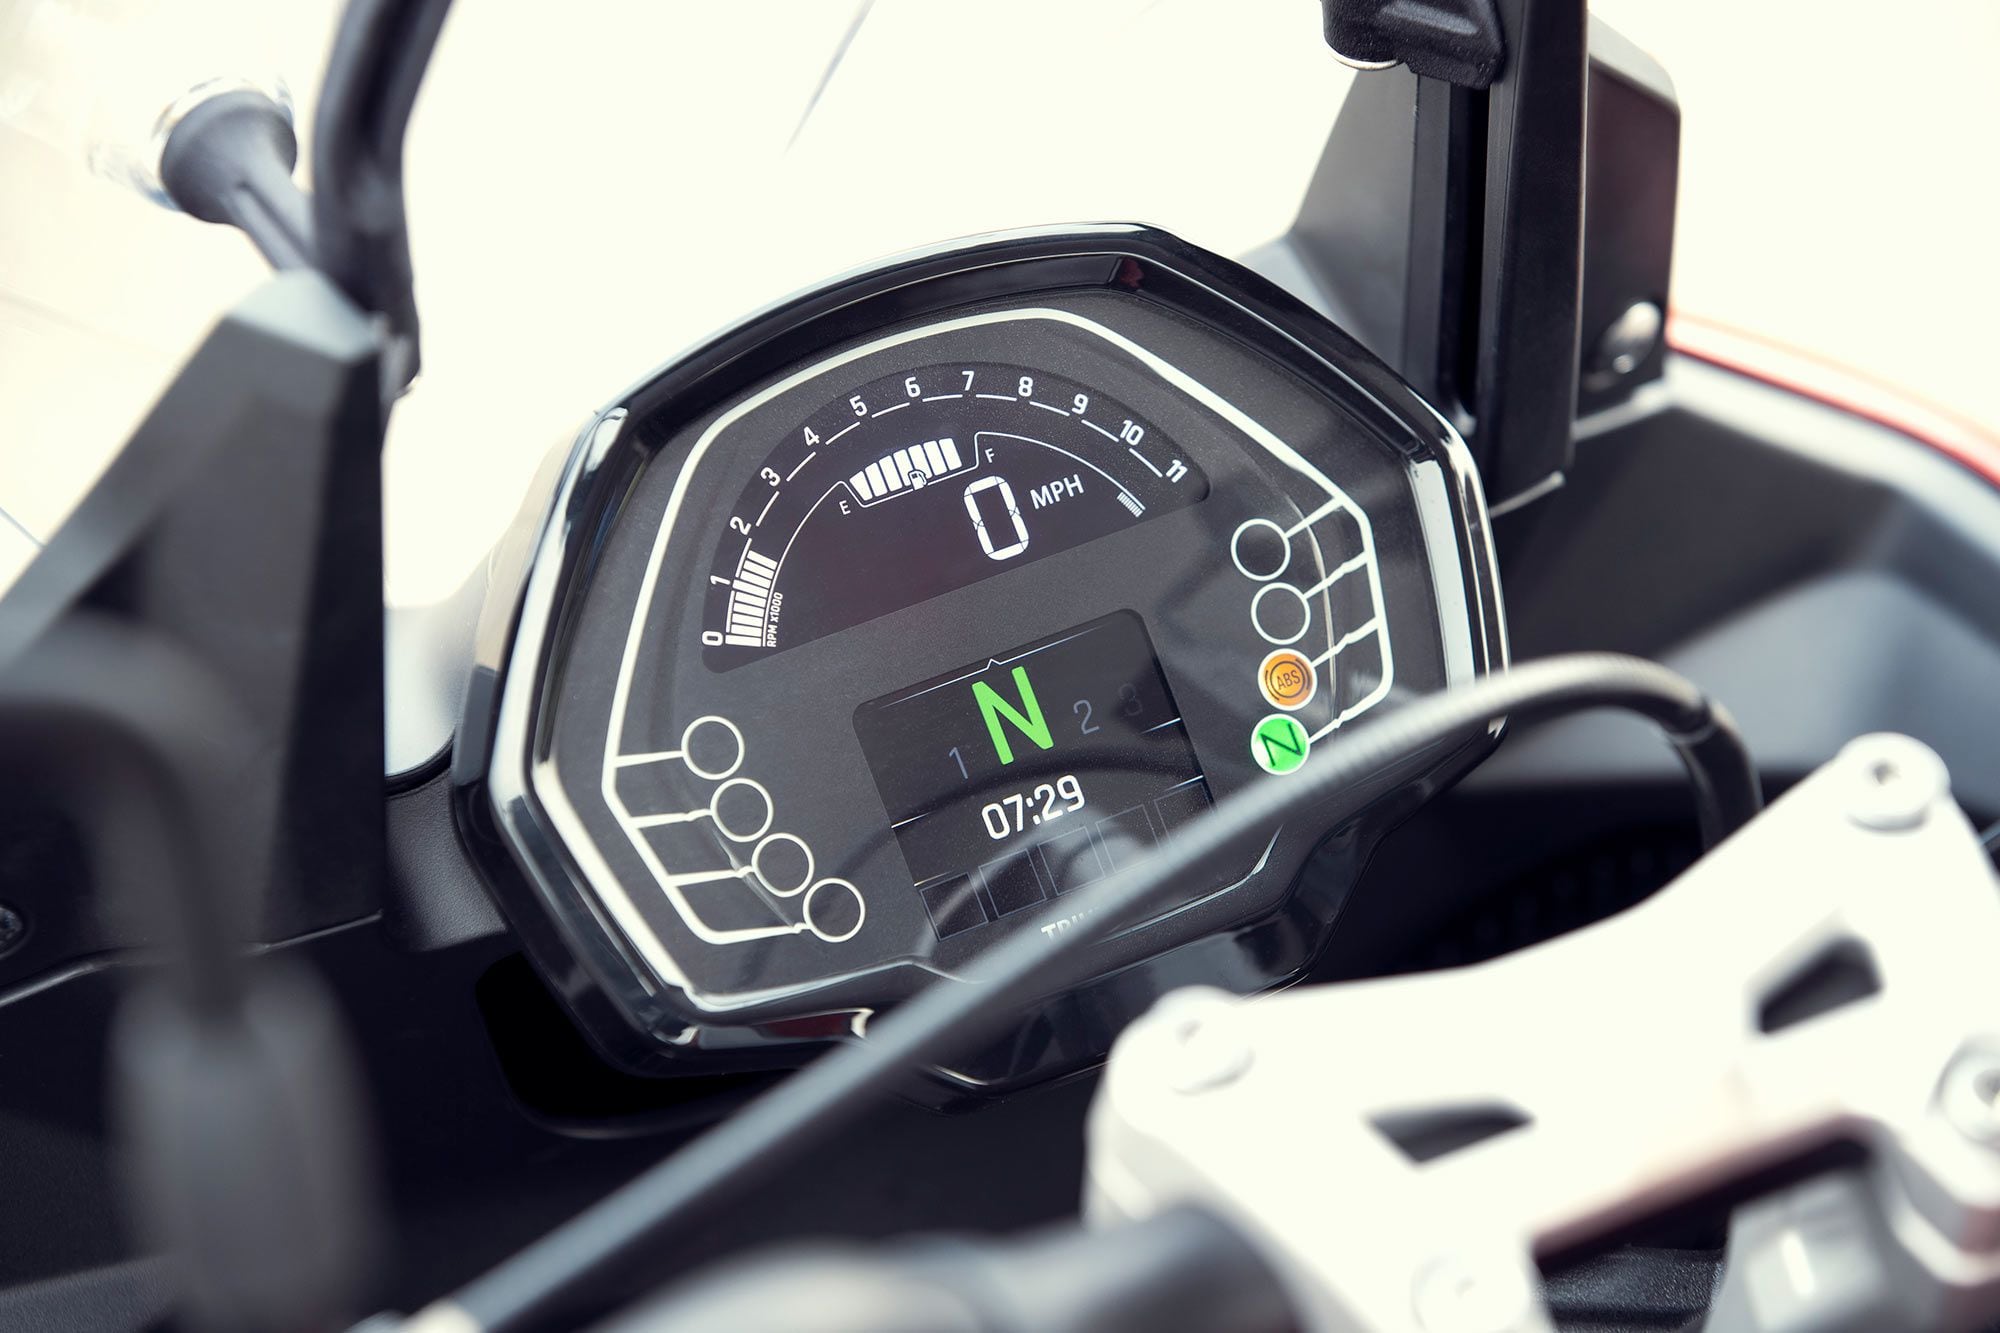 A small TFT screen integrated in a white-on-black LCD display is designed to work with the My Triumph accessory to provide turn-by-turn navigation, phone connectivity, and GoPro control.